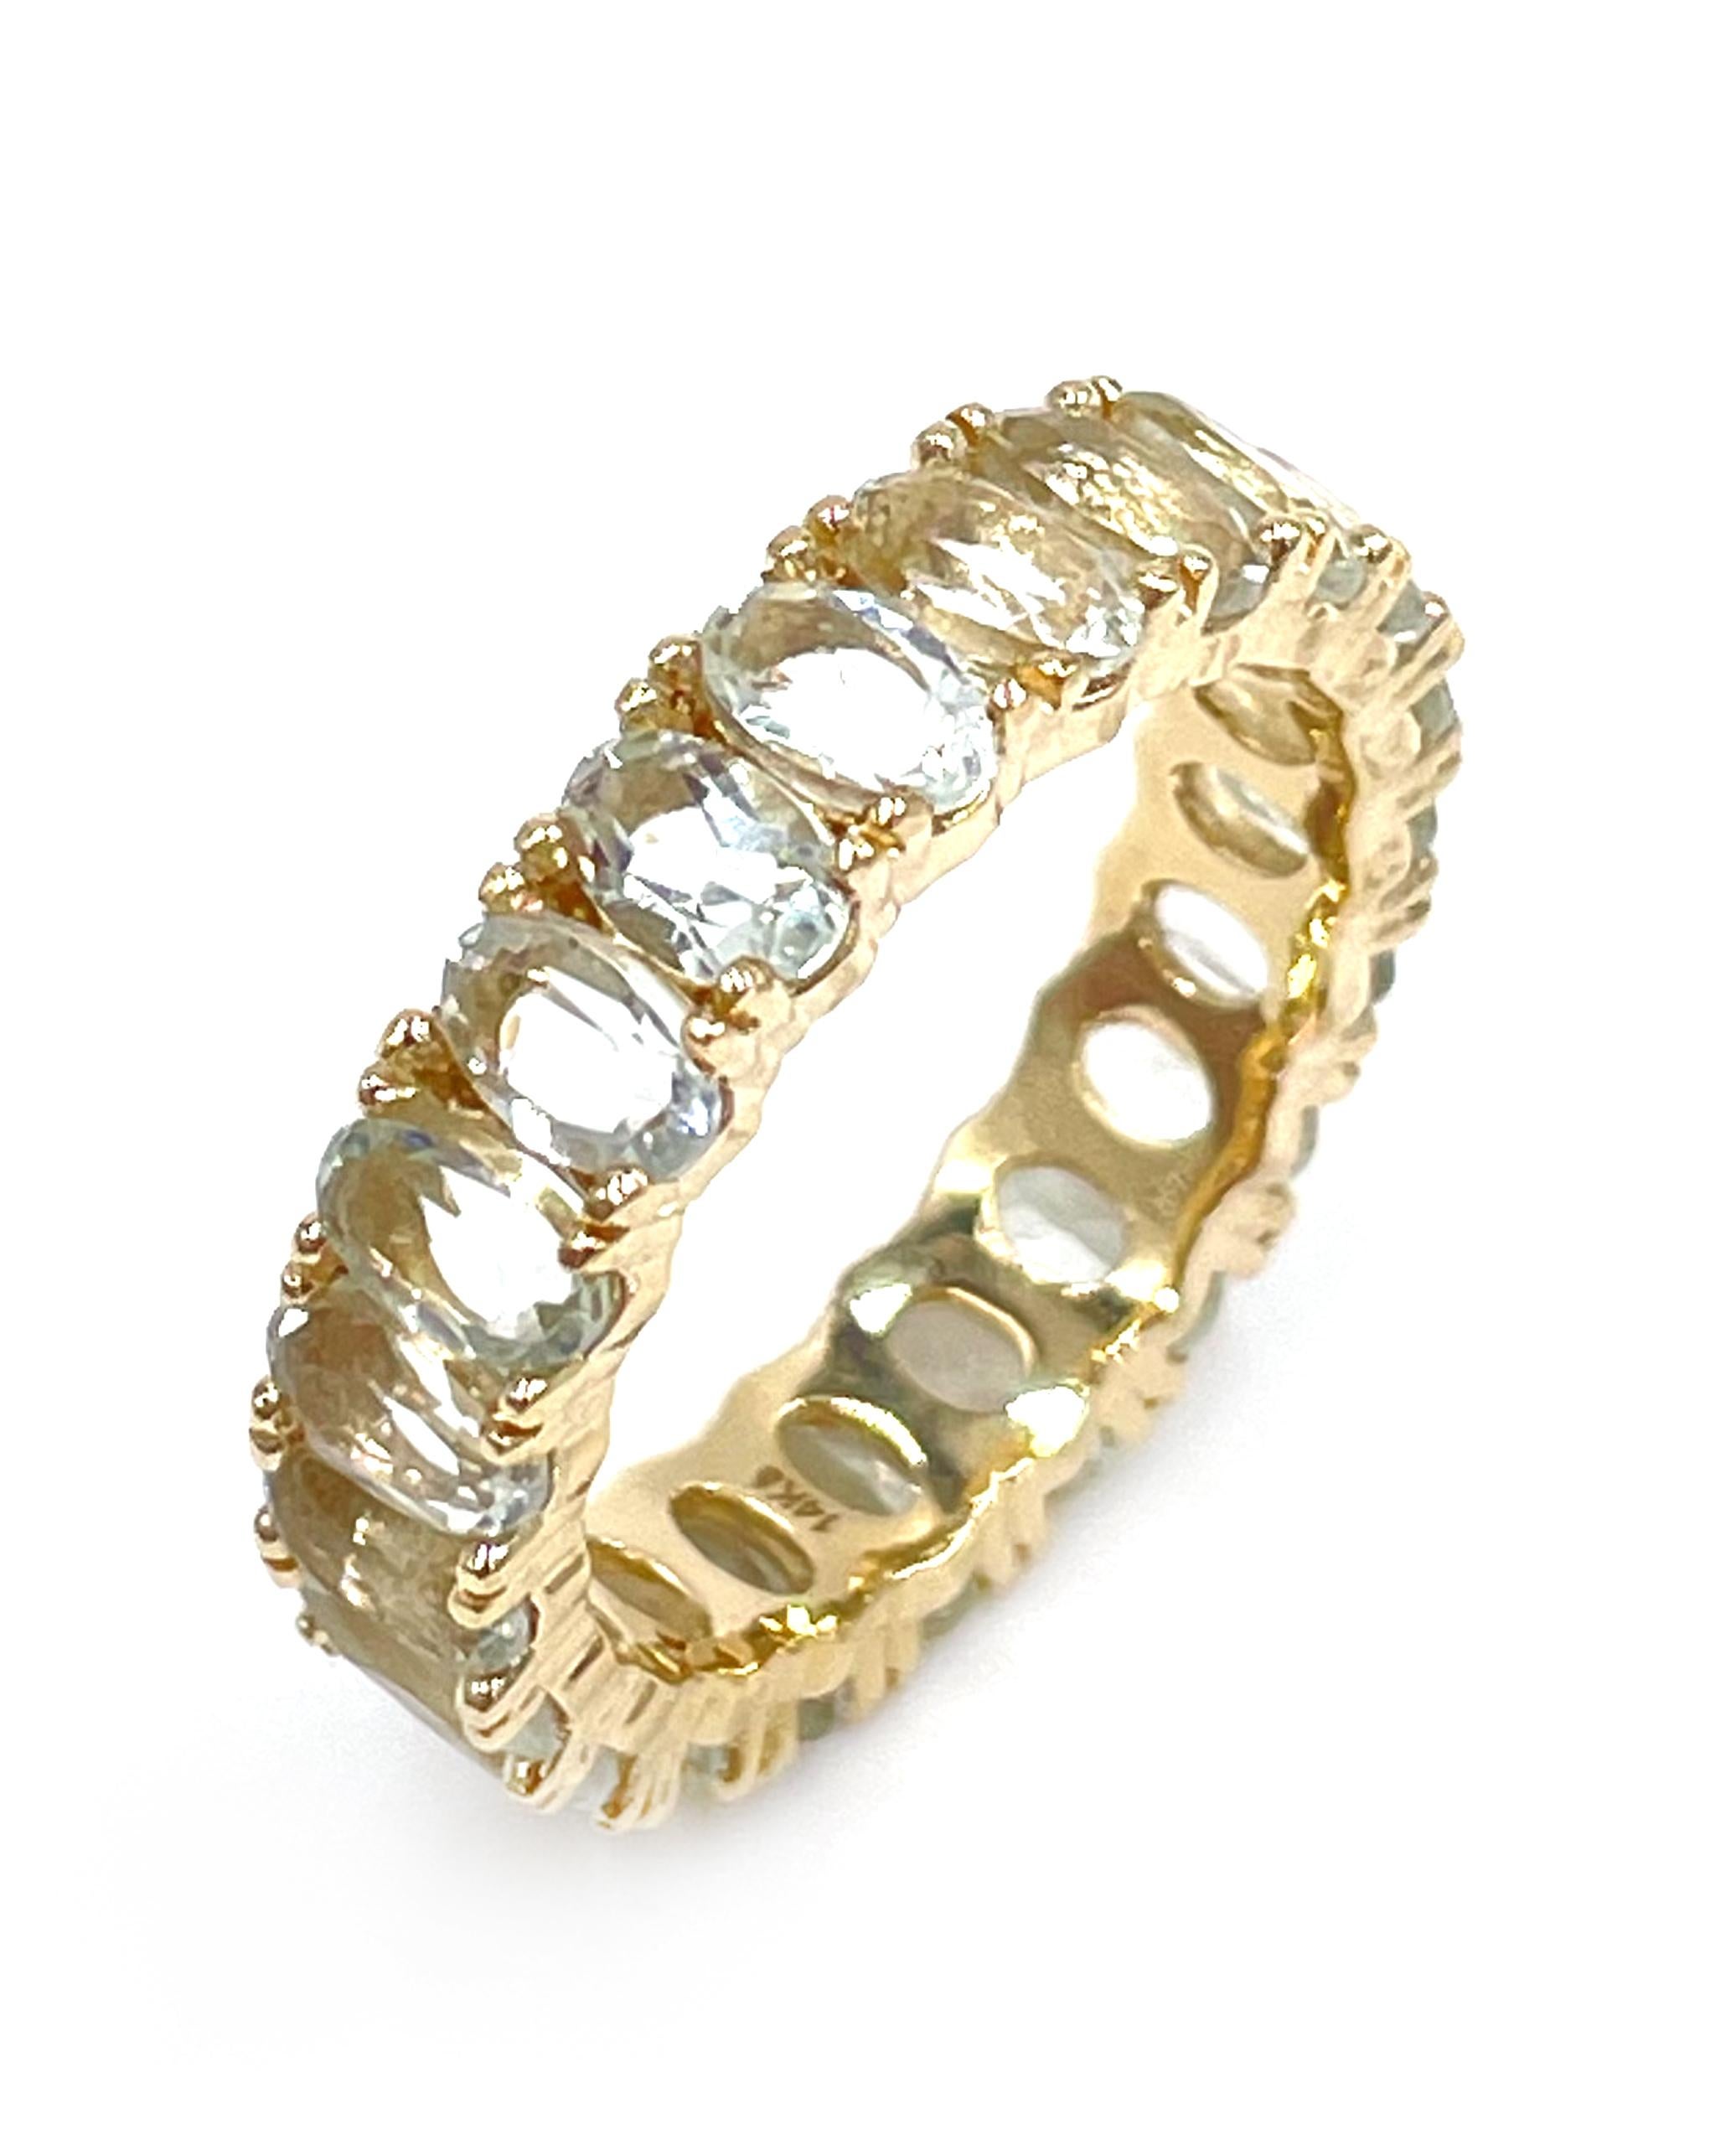 14K yellow gold eternity band with 20 faceted oval green amethysts weighing 4.98 carats total.

* Approximately 5mm wide